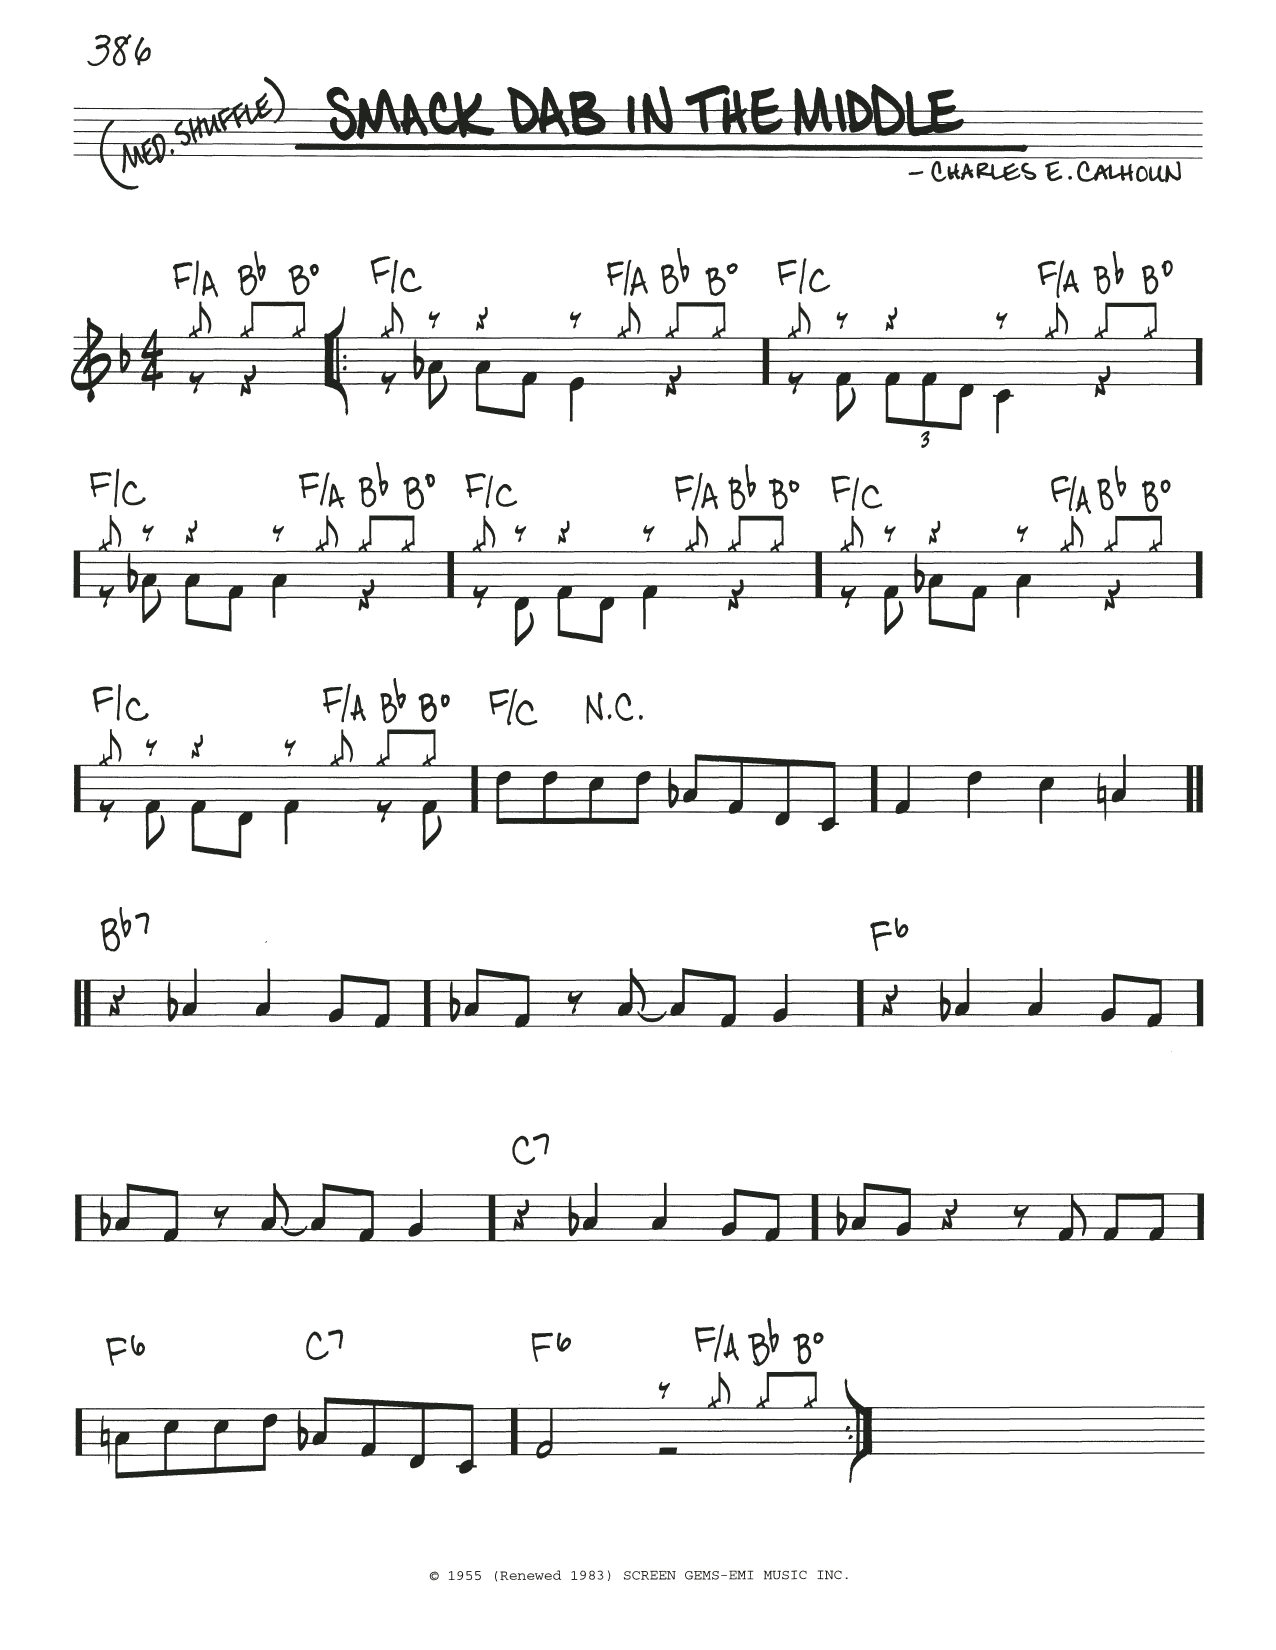 Download Charles E. Calhoun Smack Dab In The Middle Sheet Music